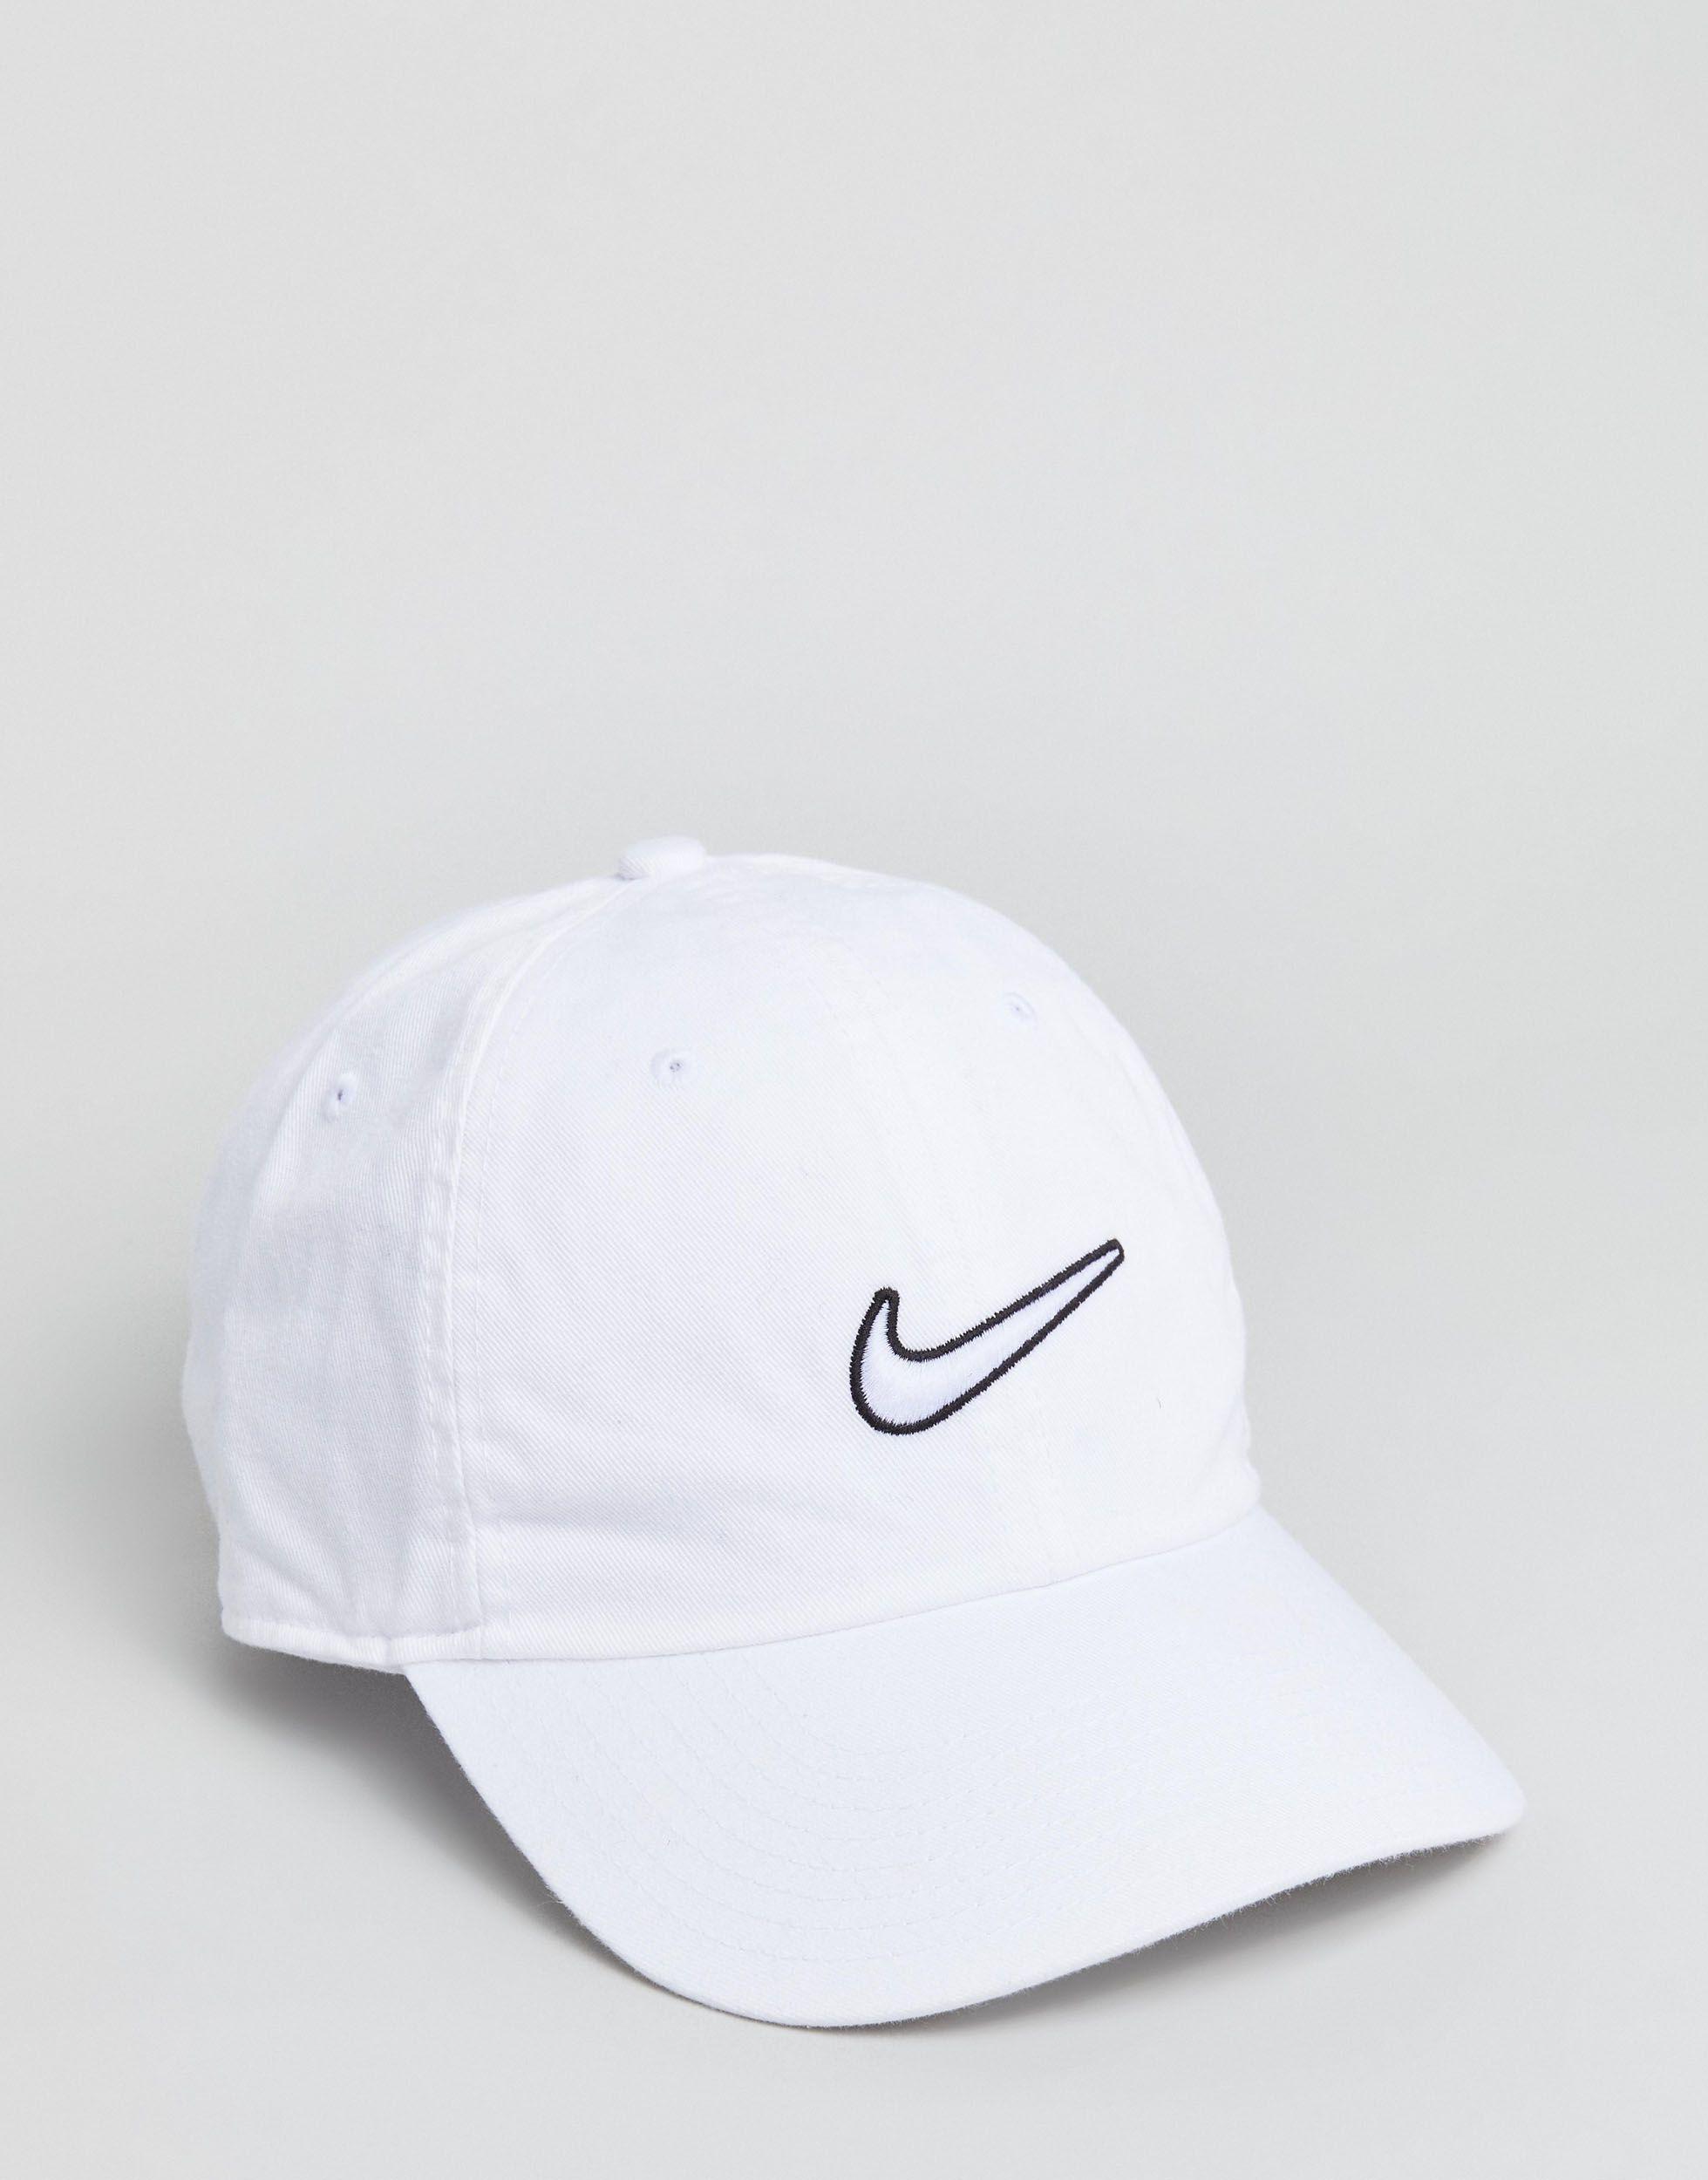 Nike H86 Swoosh Washed Cap in White for Men - Save 9% - Lyst